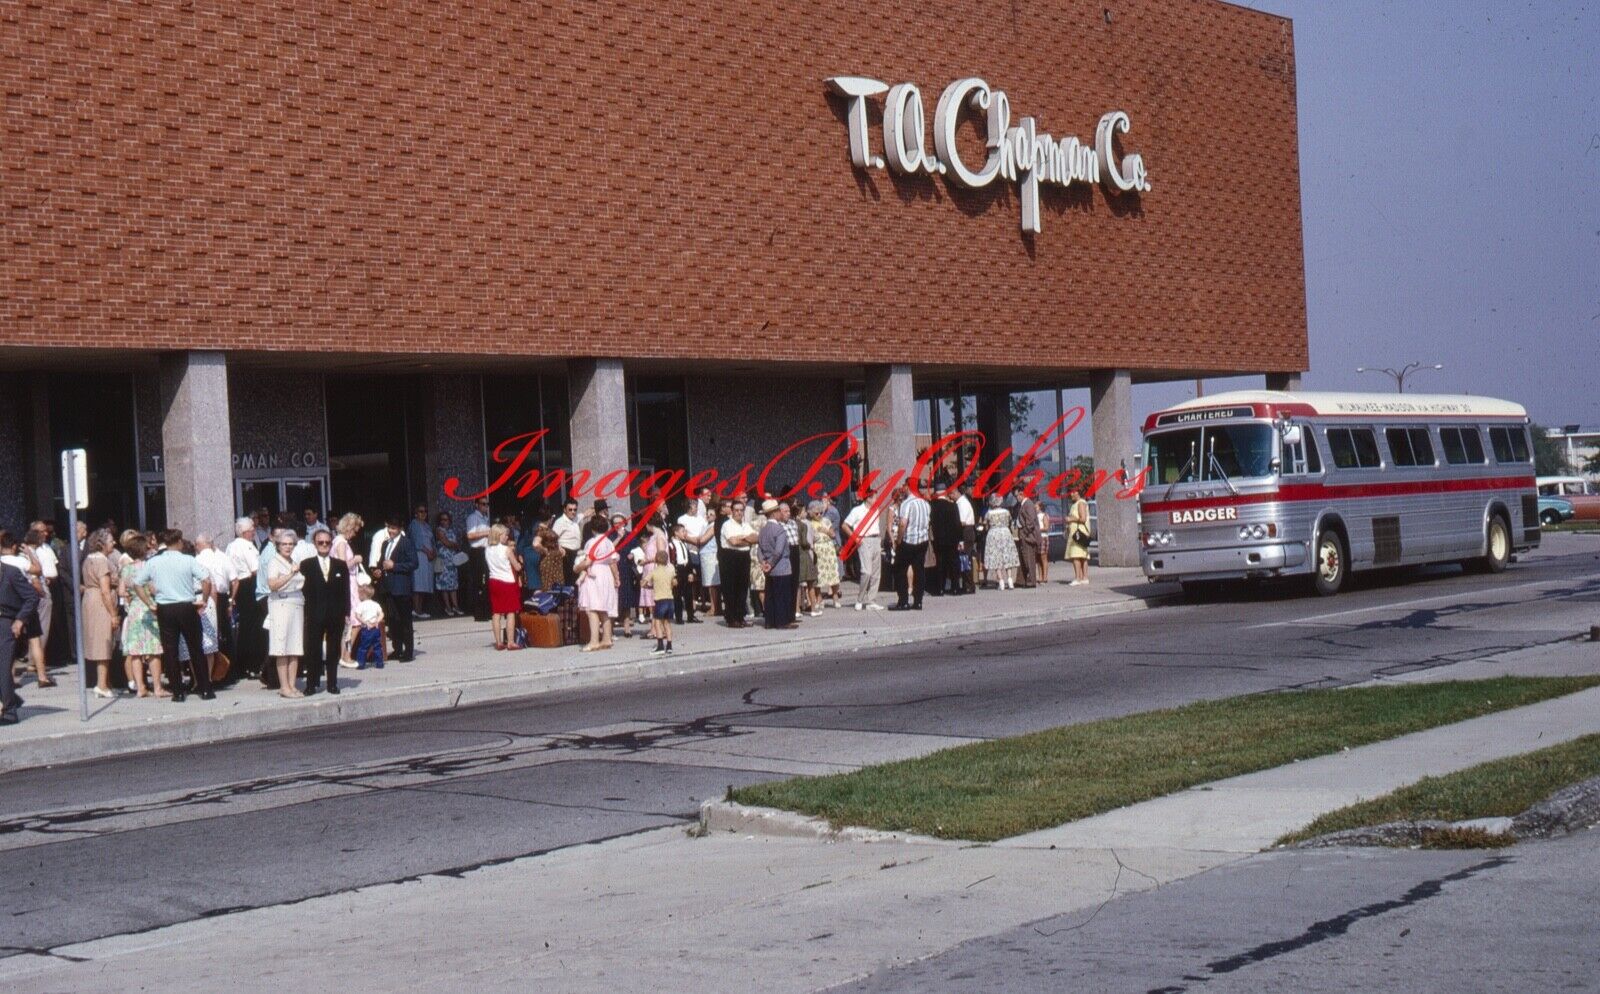 1966 35mm slide. Badger bus outside a T.A. Chapman store at a Mall in Milwaukee